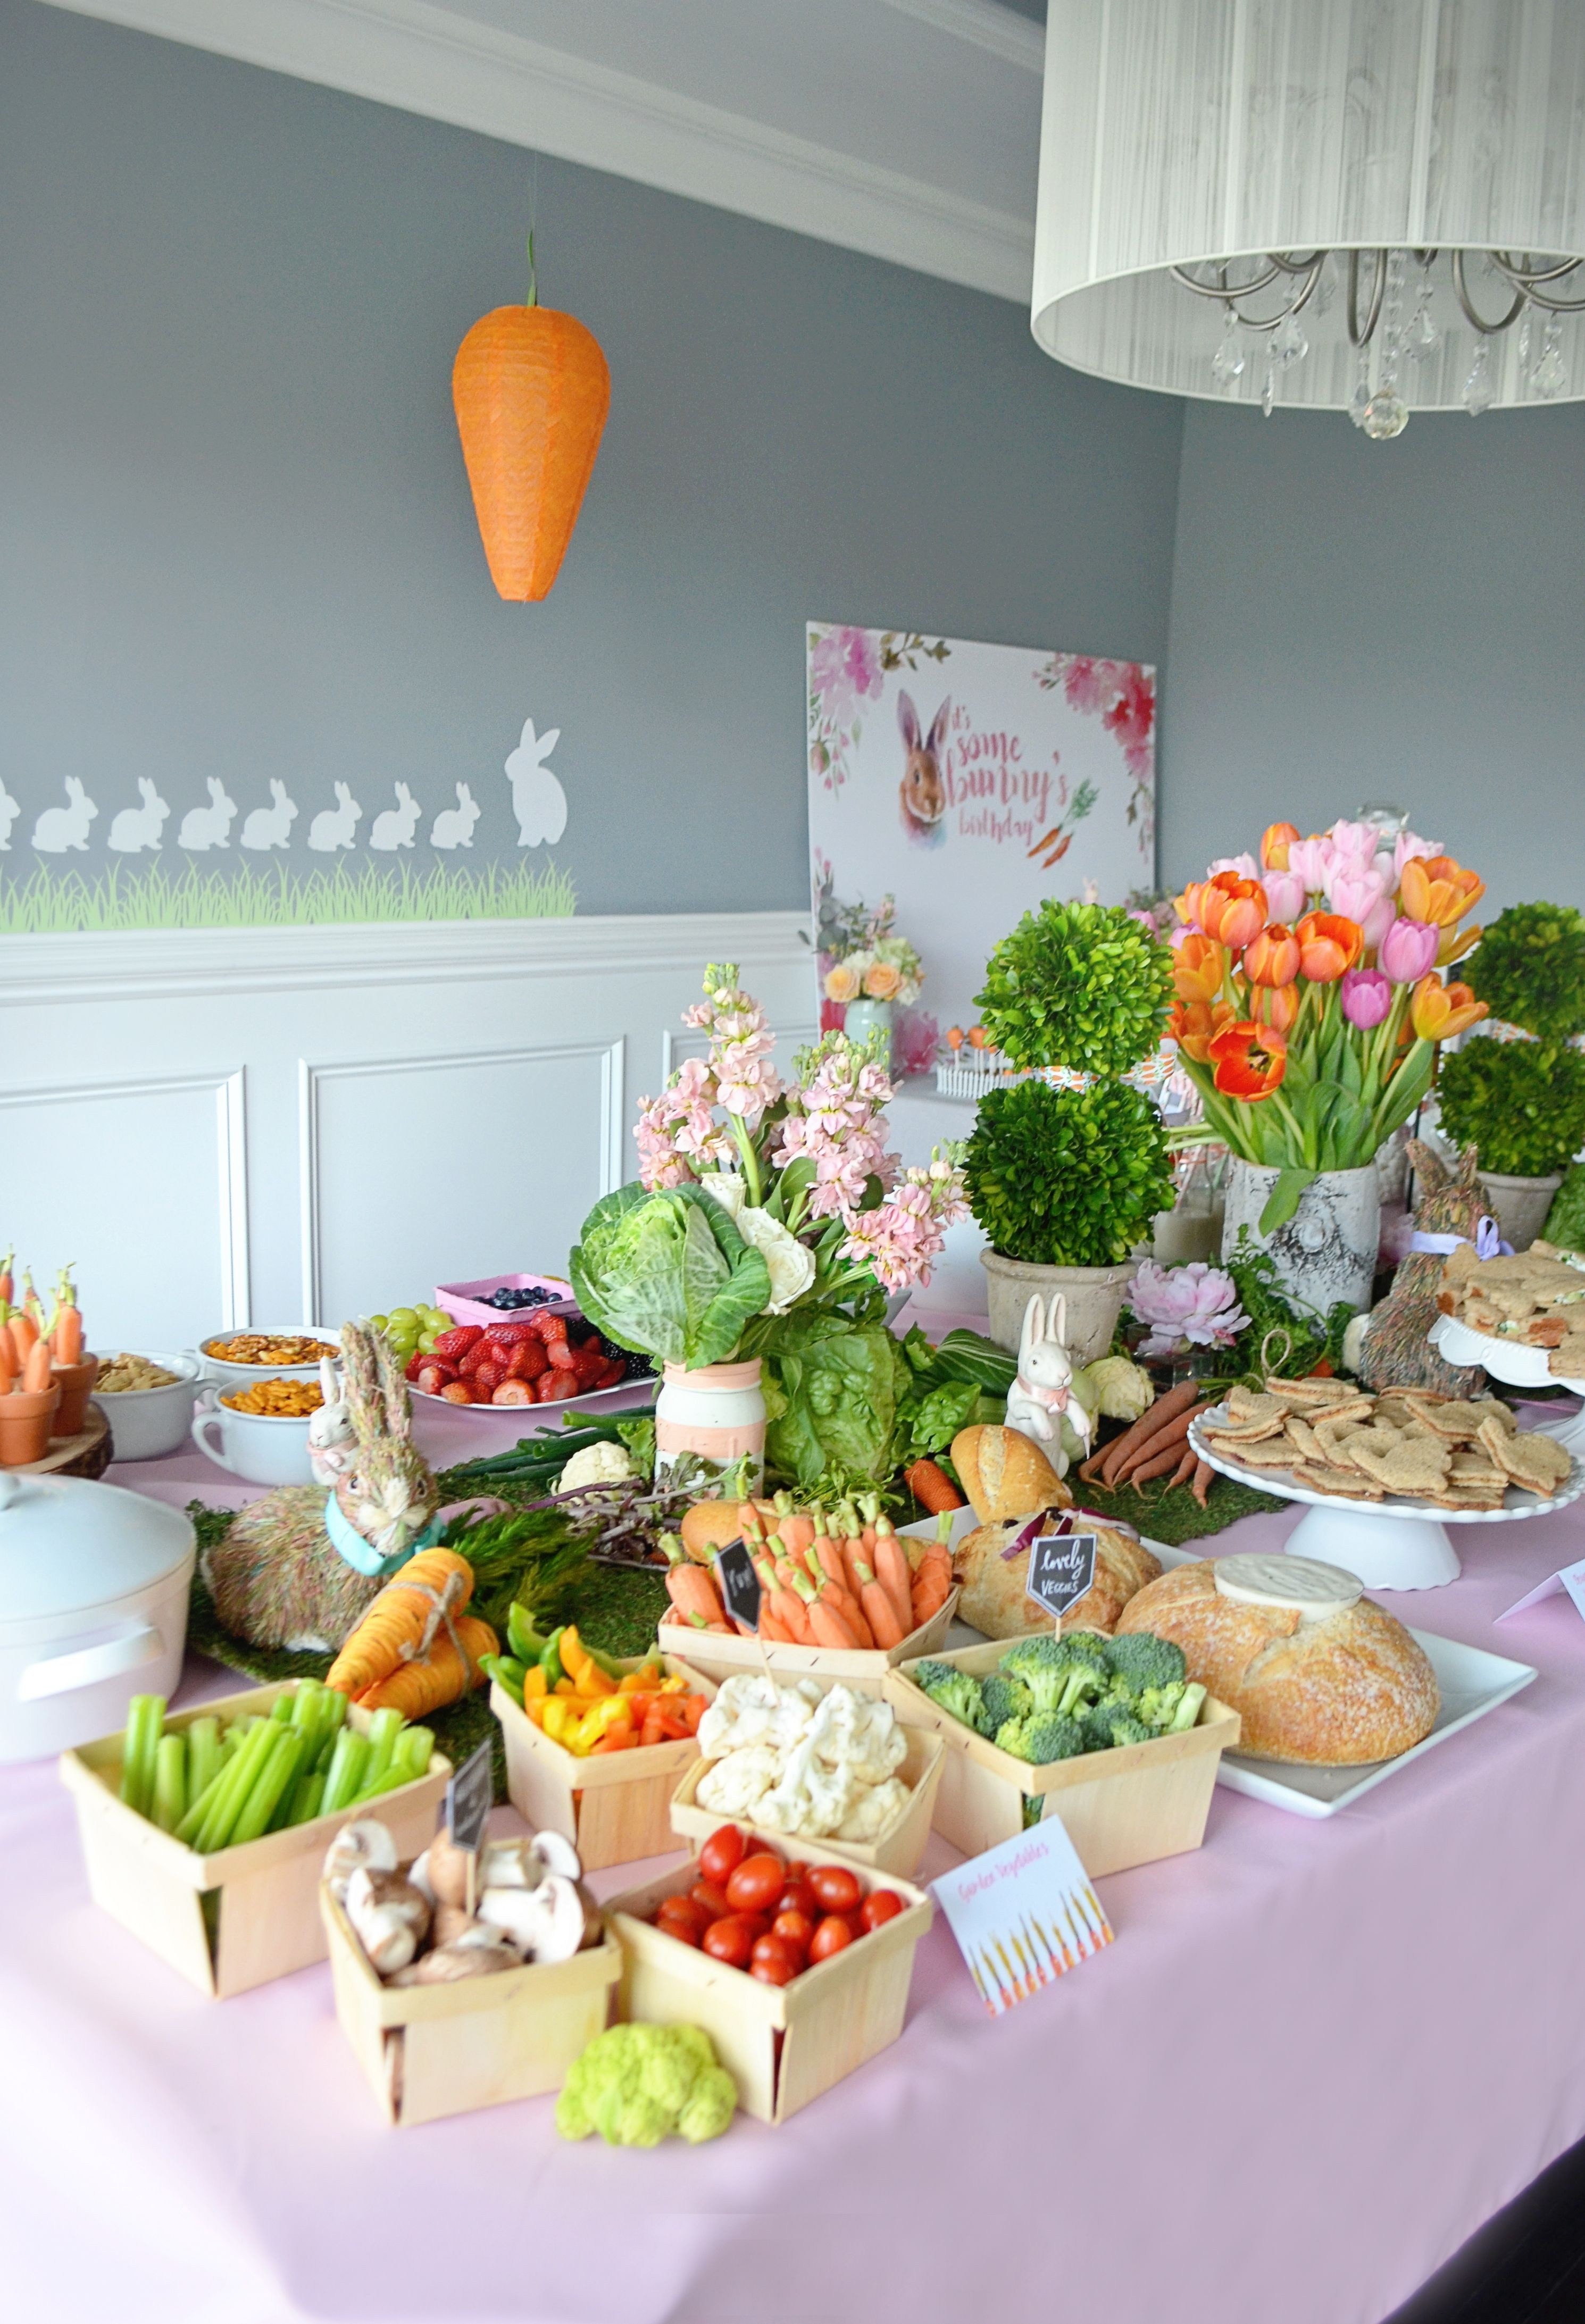 Easter Bunny Party Ideas
 Shop the Party Bunny Themed Party Easter